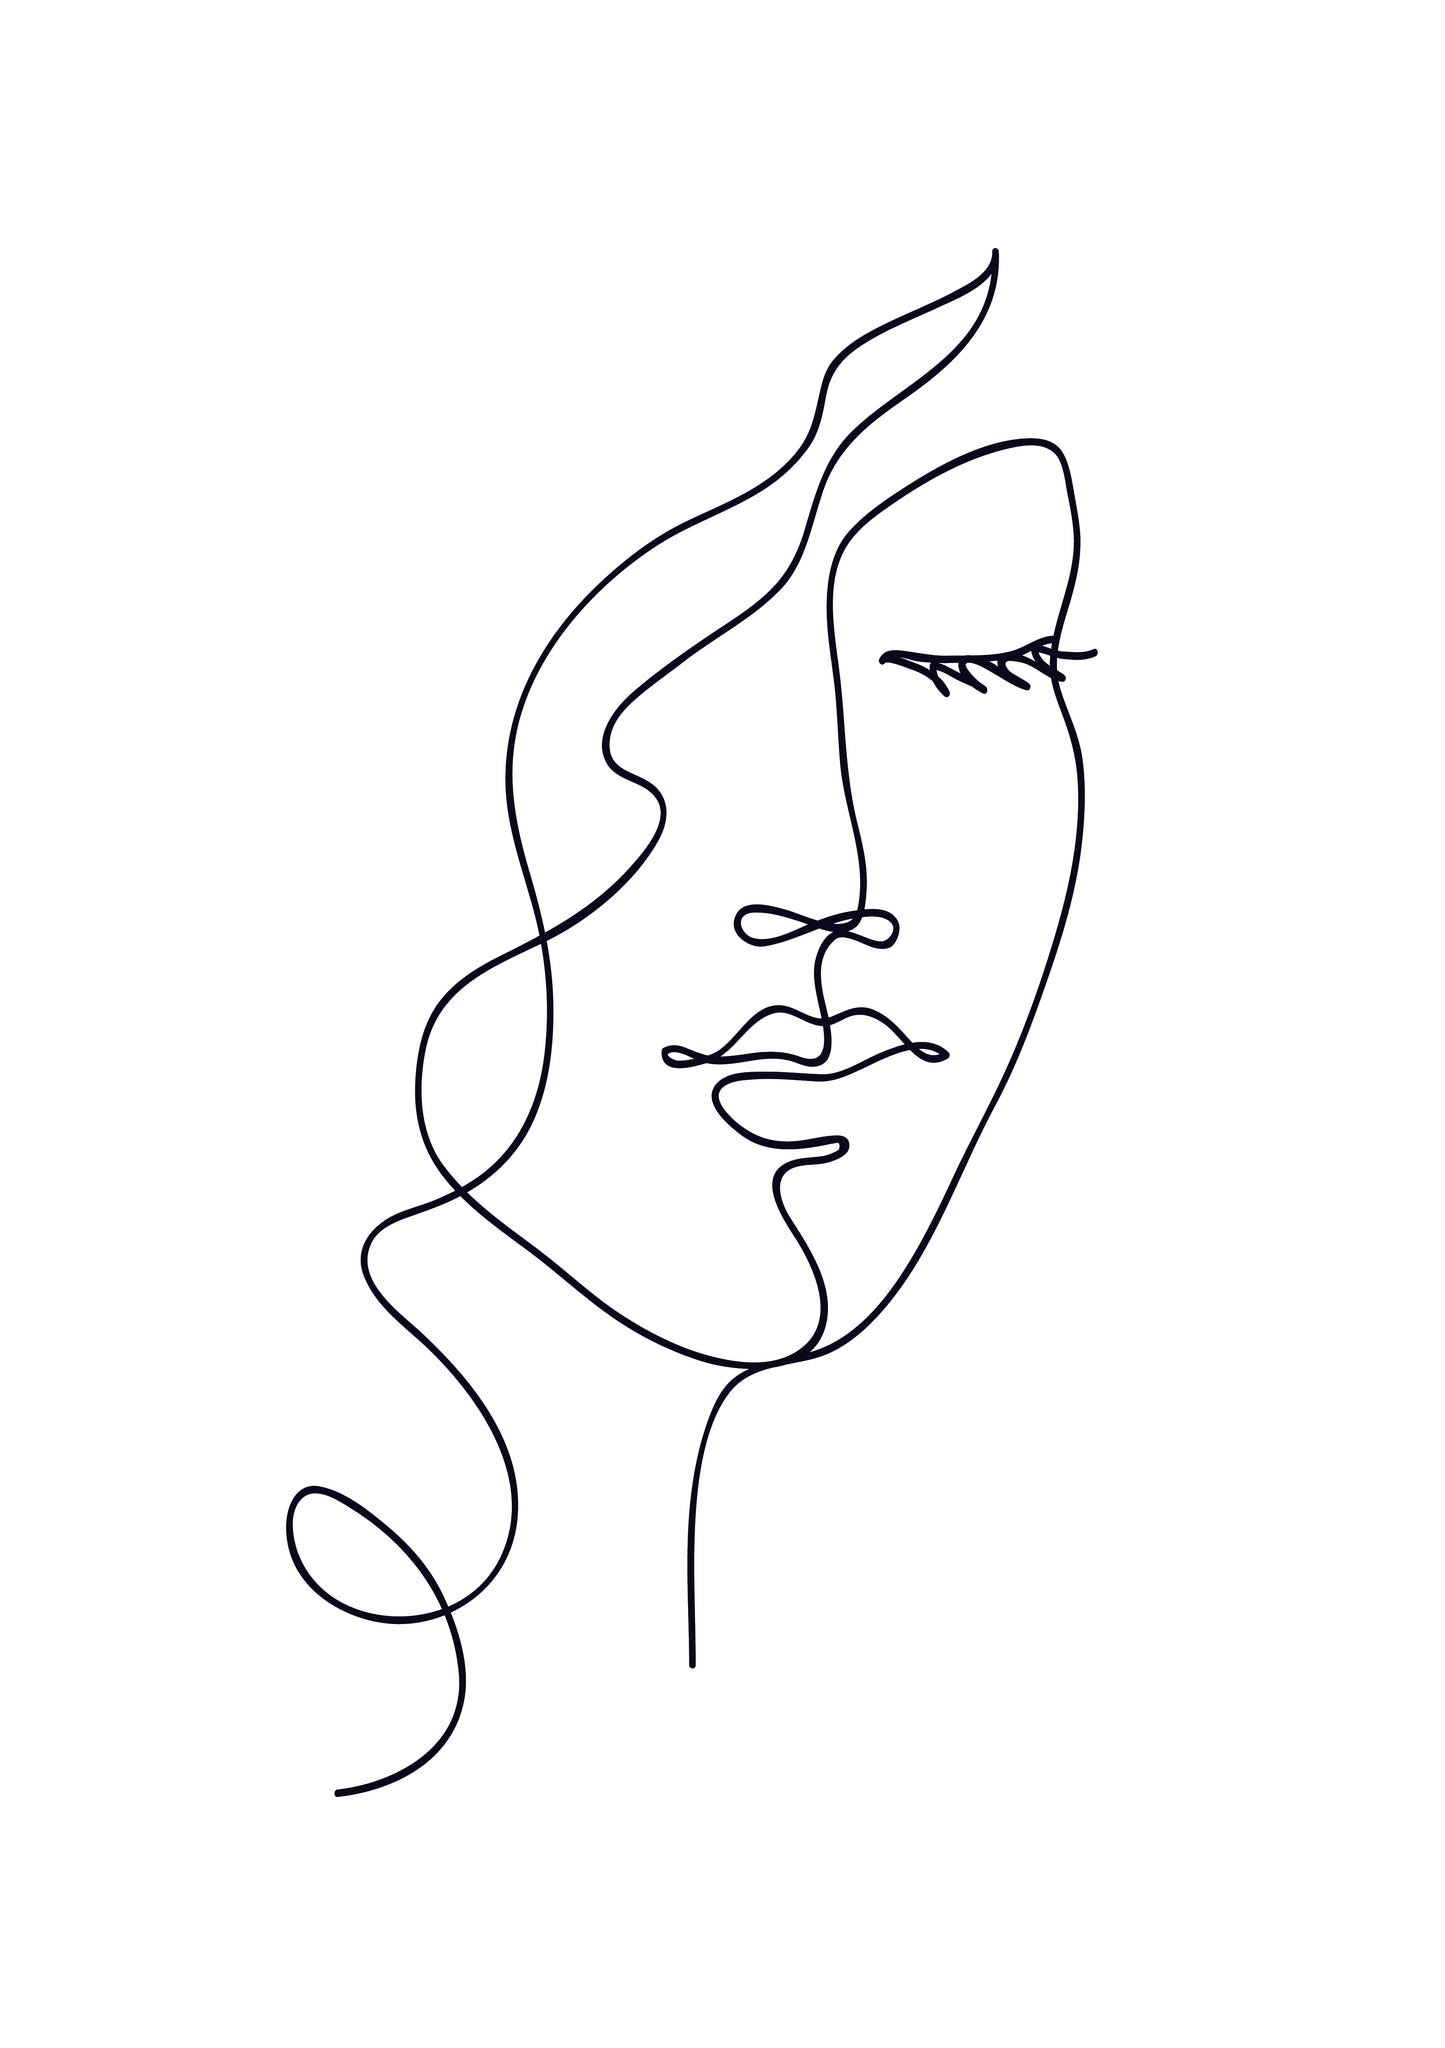 Abstract woman face with wavy hair